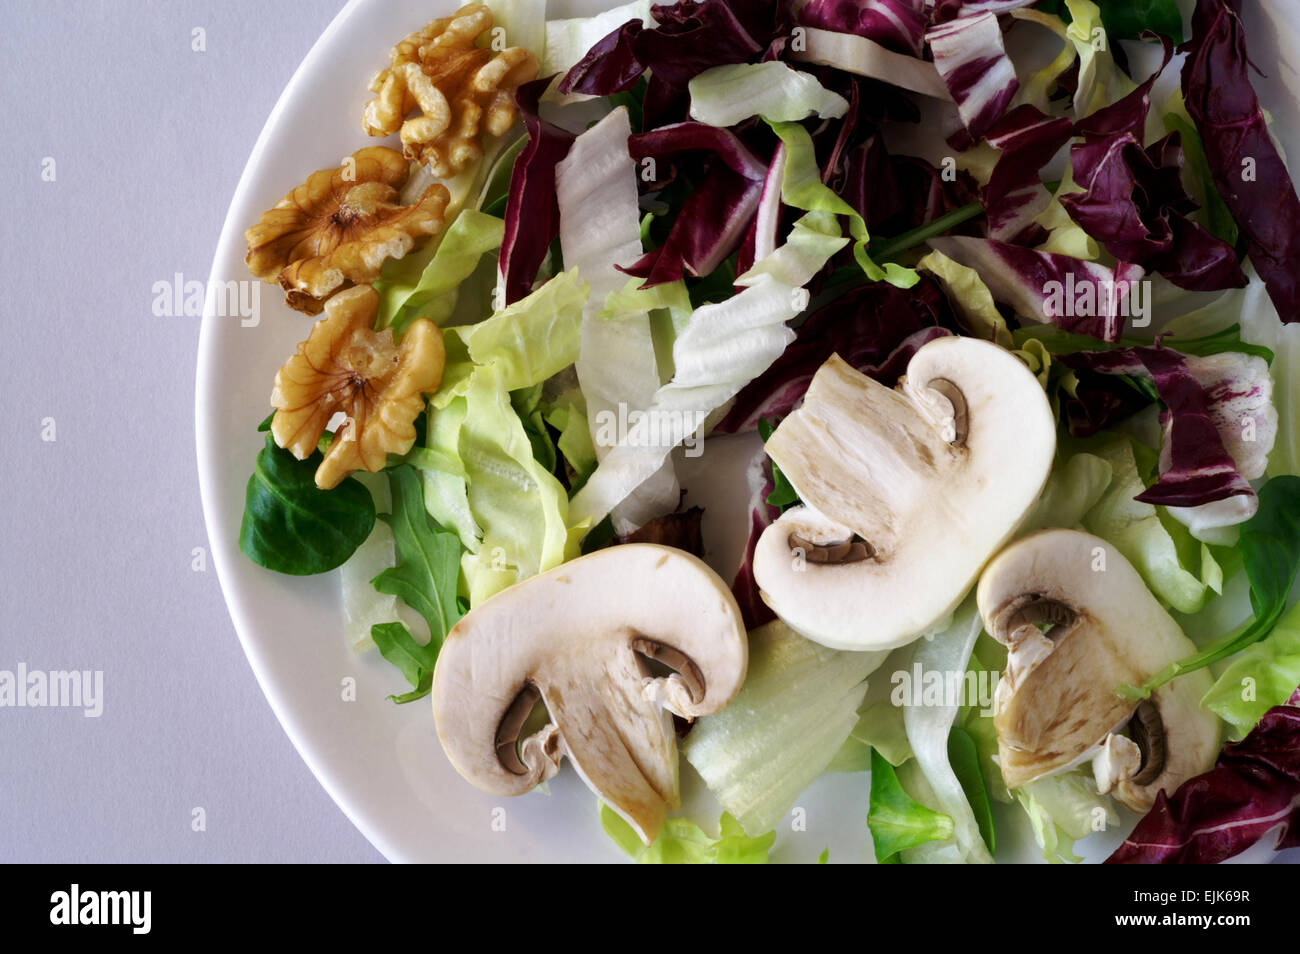 Salad with mushrooms and nuts Stock Photo